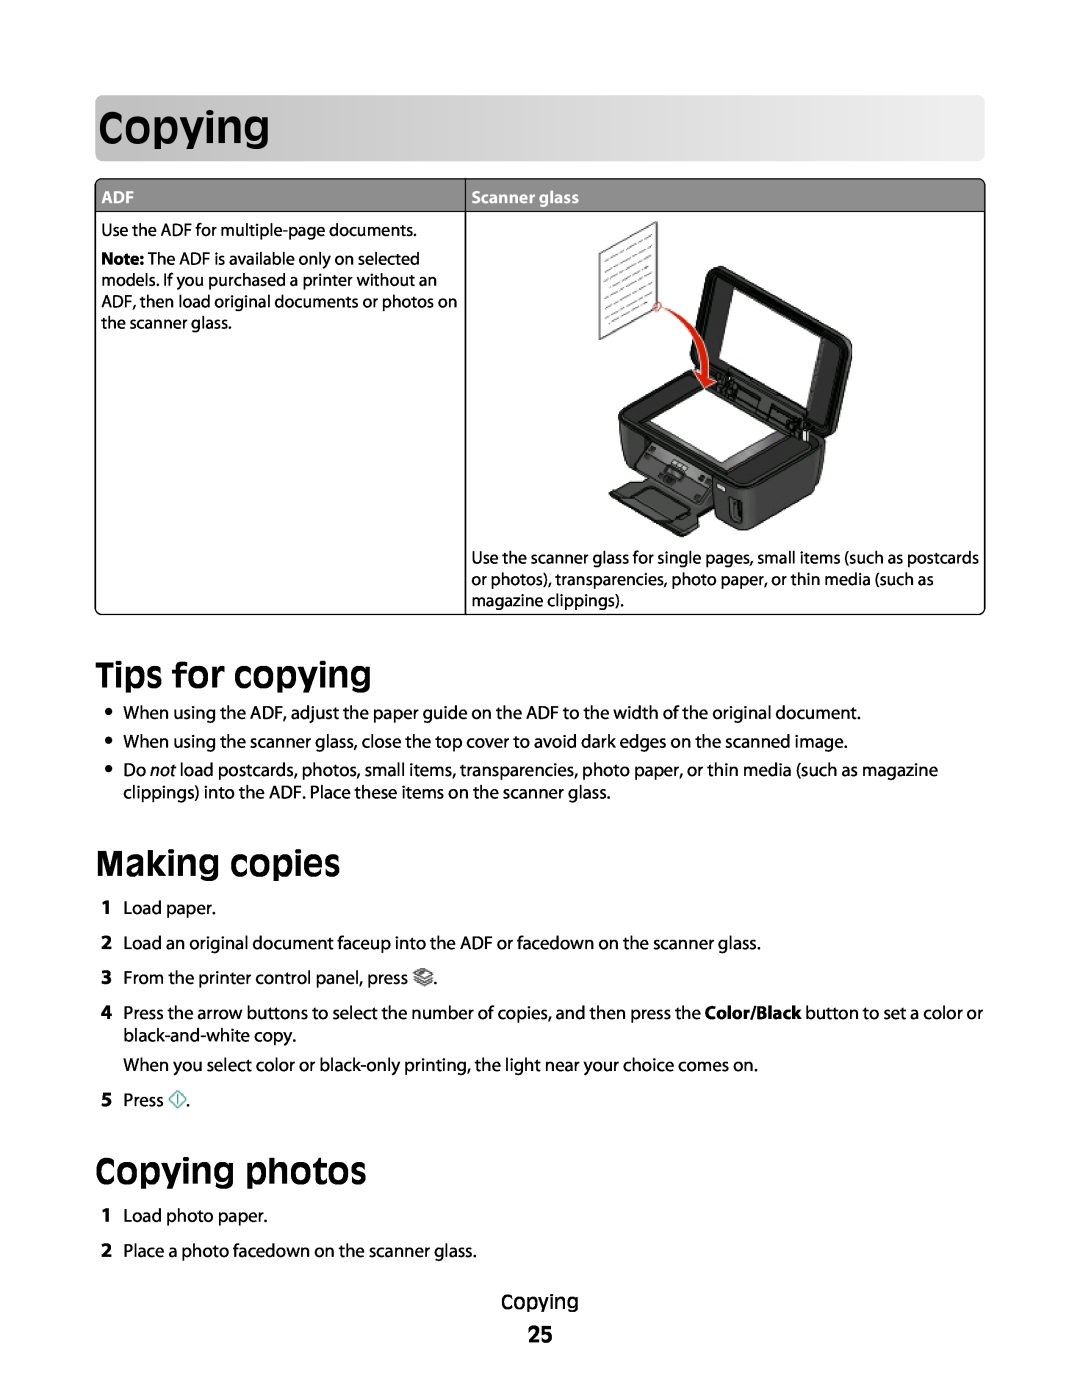 Lexmark S300 manual Tips for copying, Making copies, Copying photos 